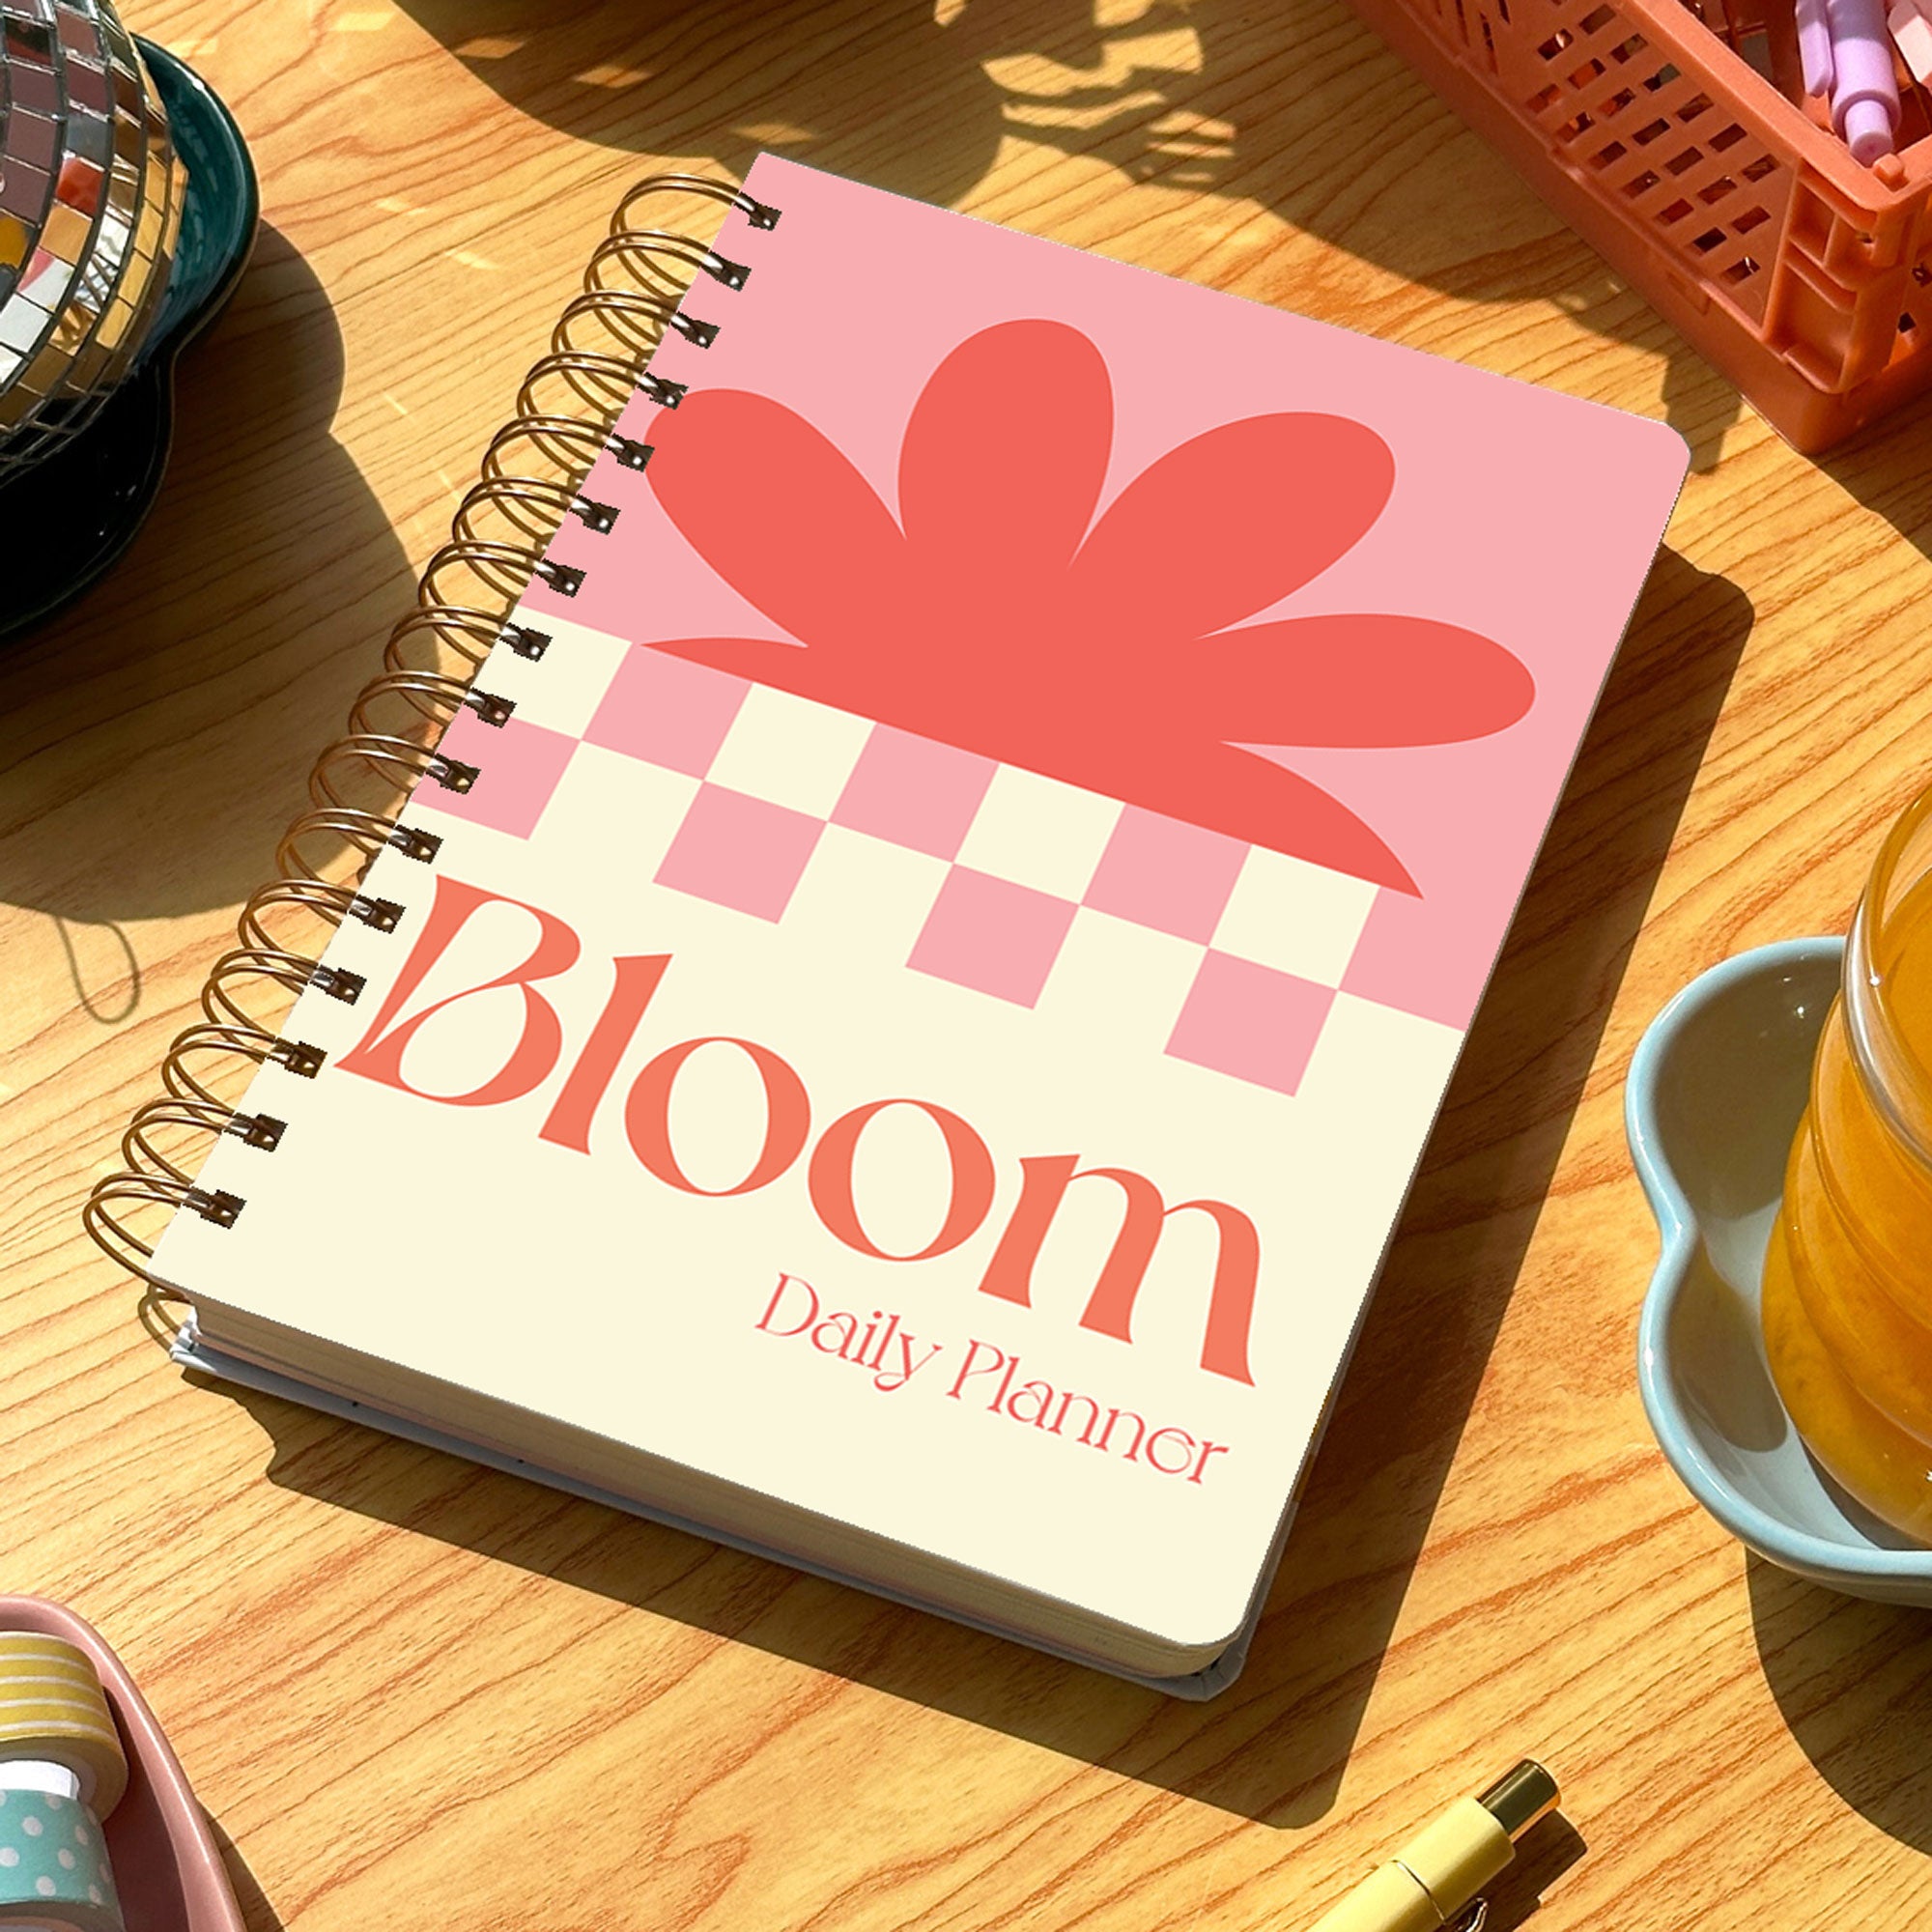 Daily Planner | Bloom